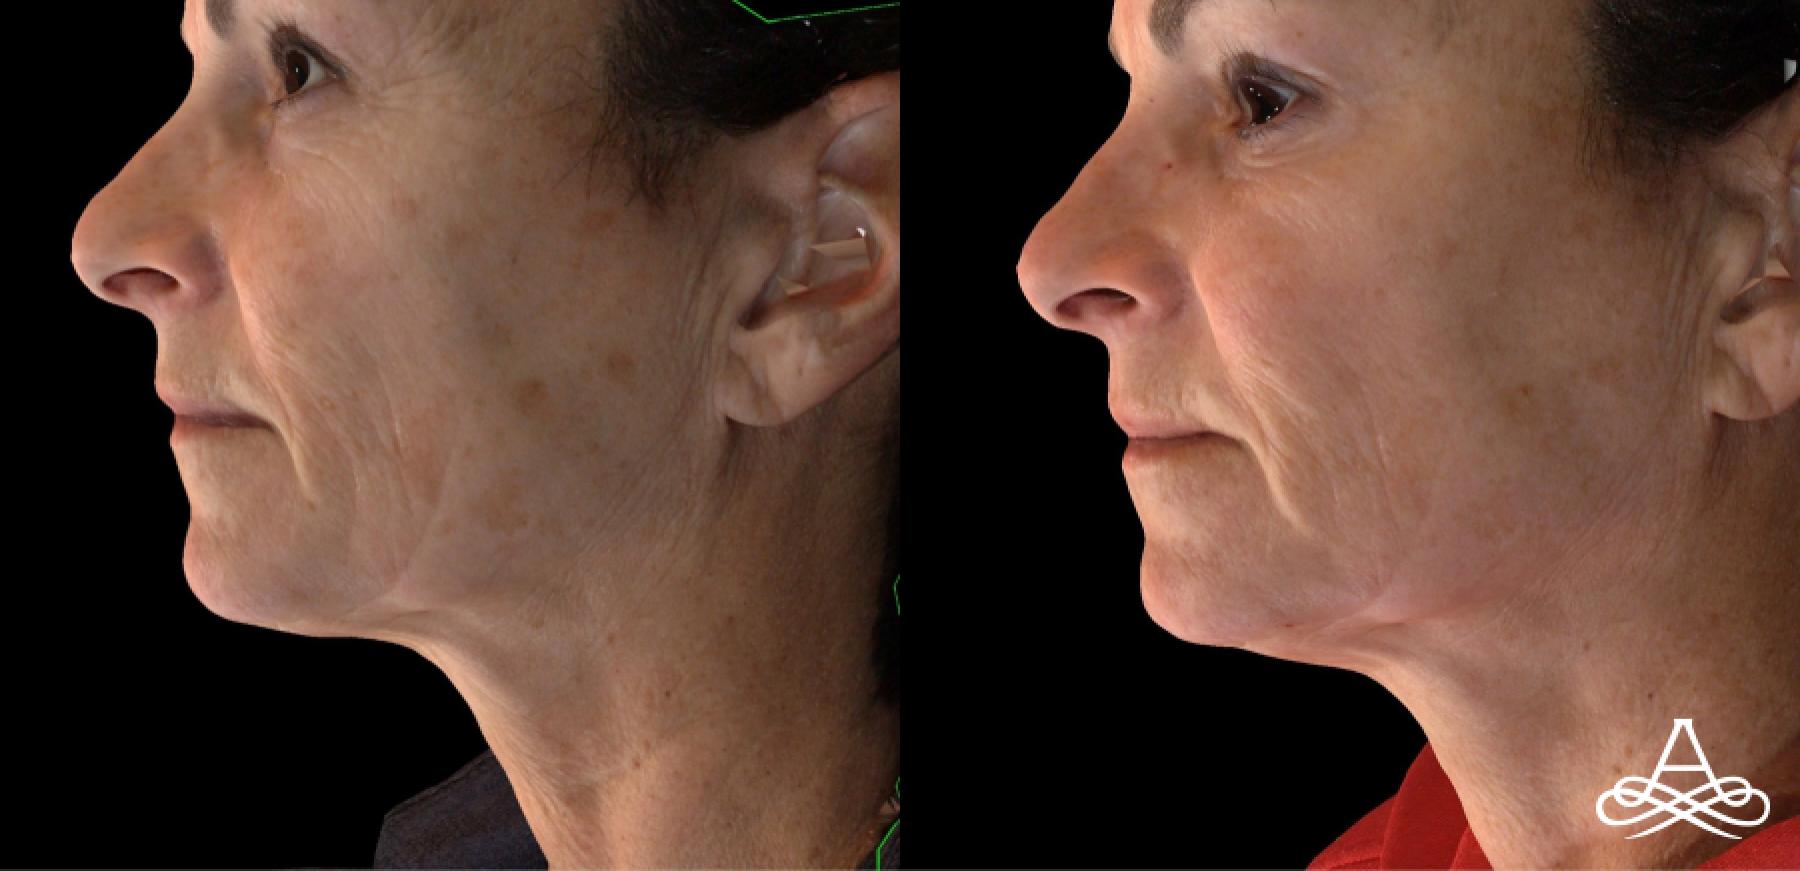 CO2 Laser Resurfacing: Patient 1 - Before and After  